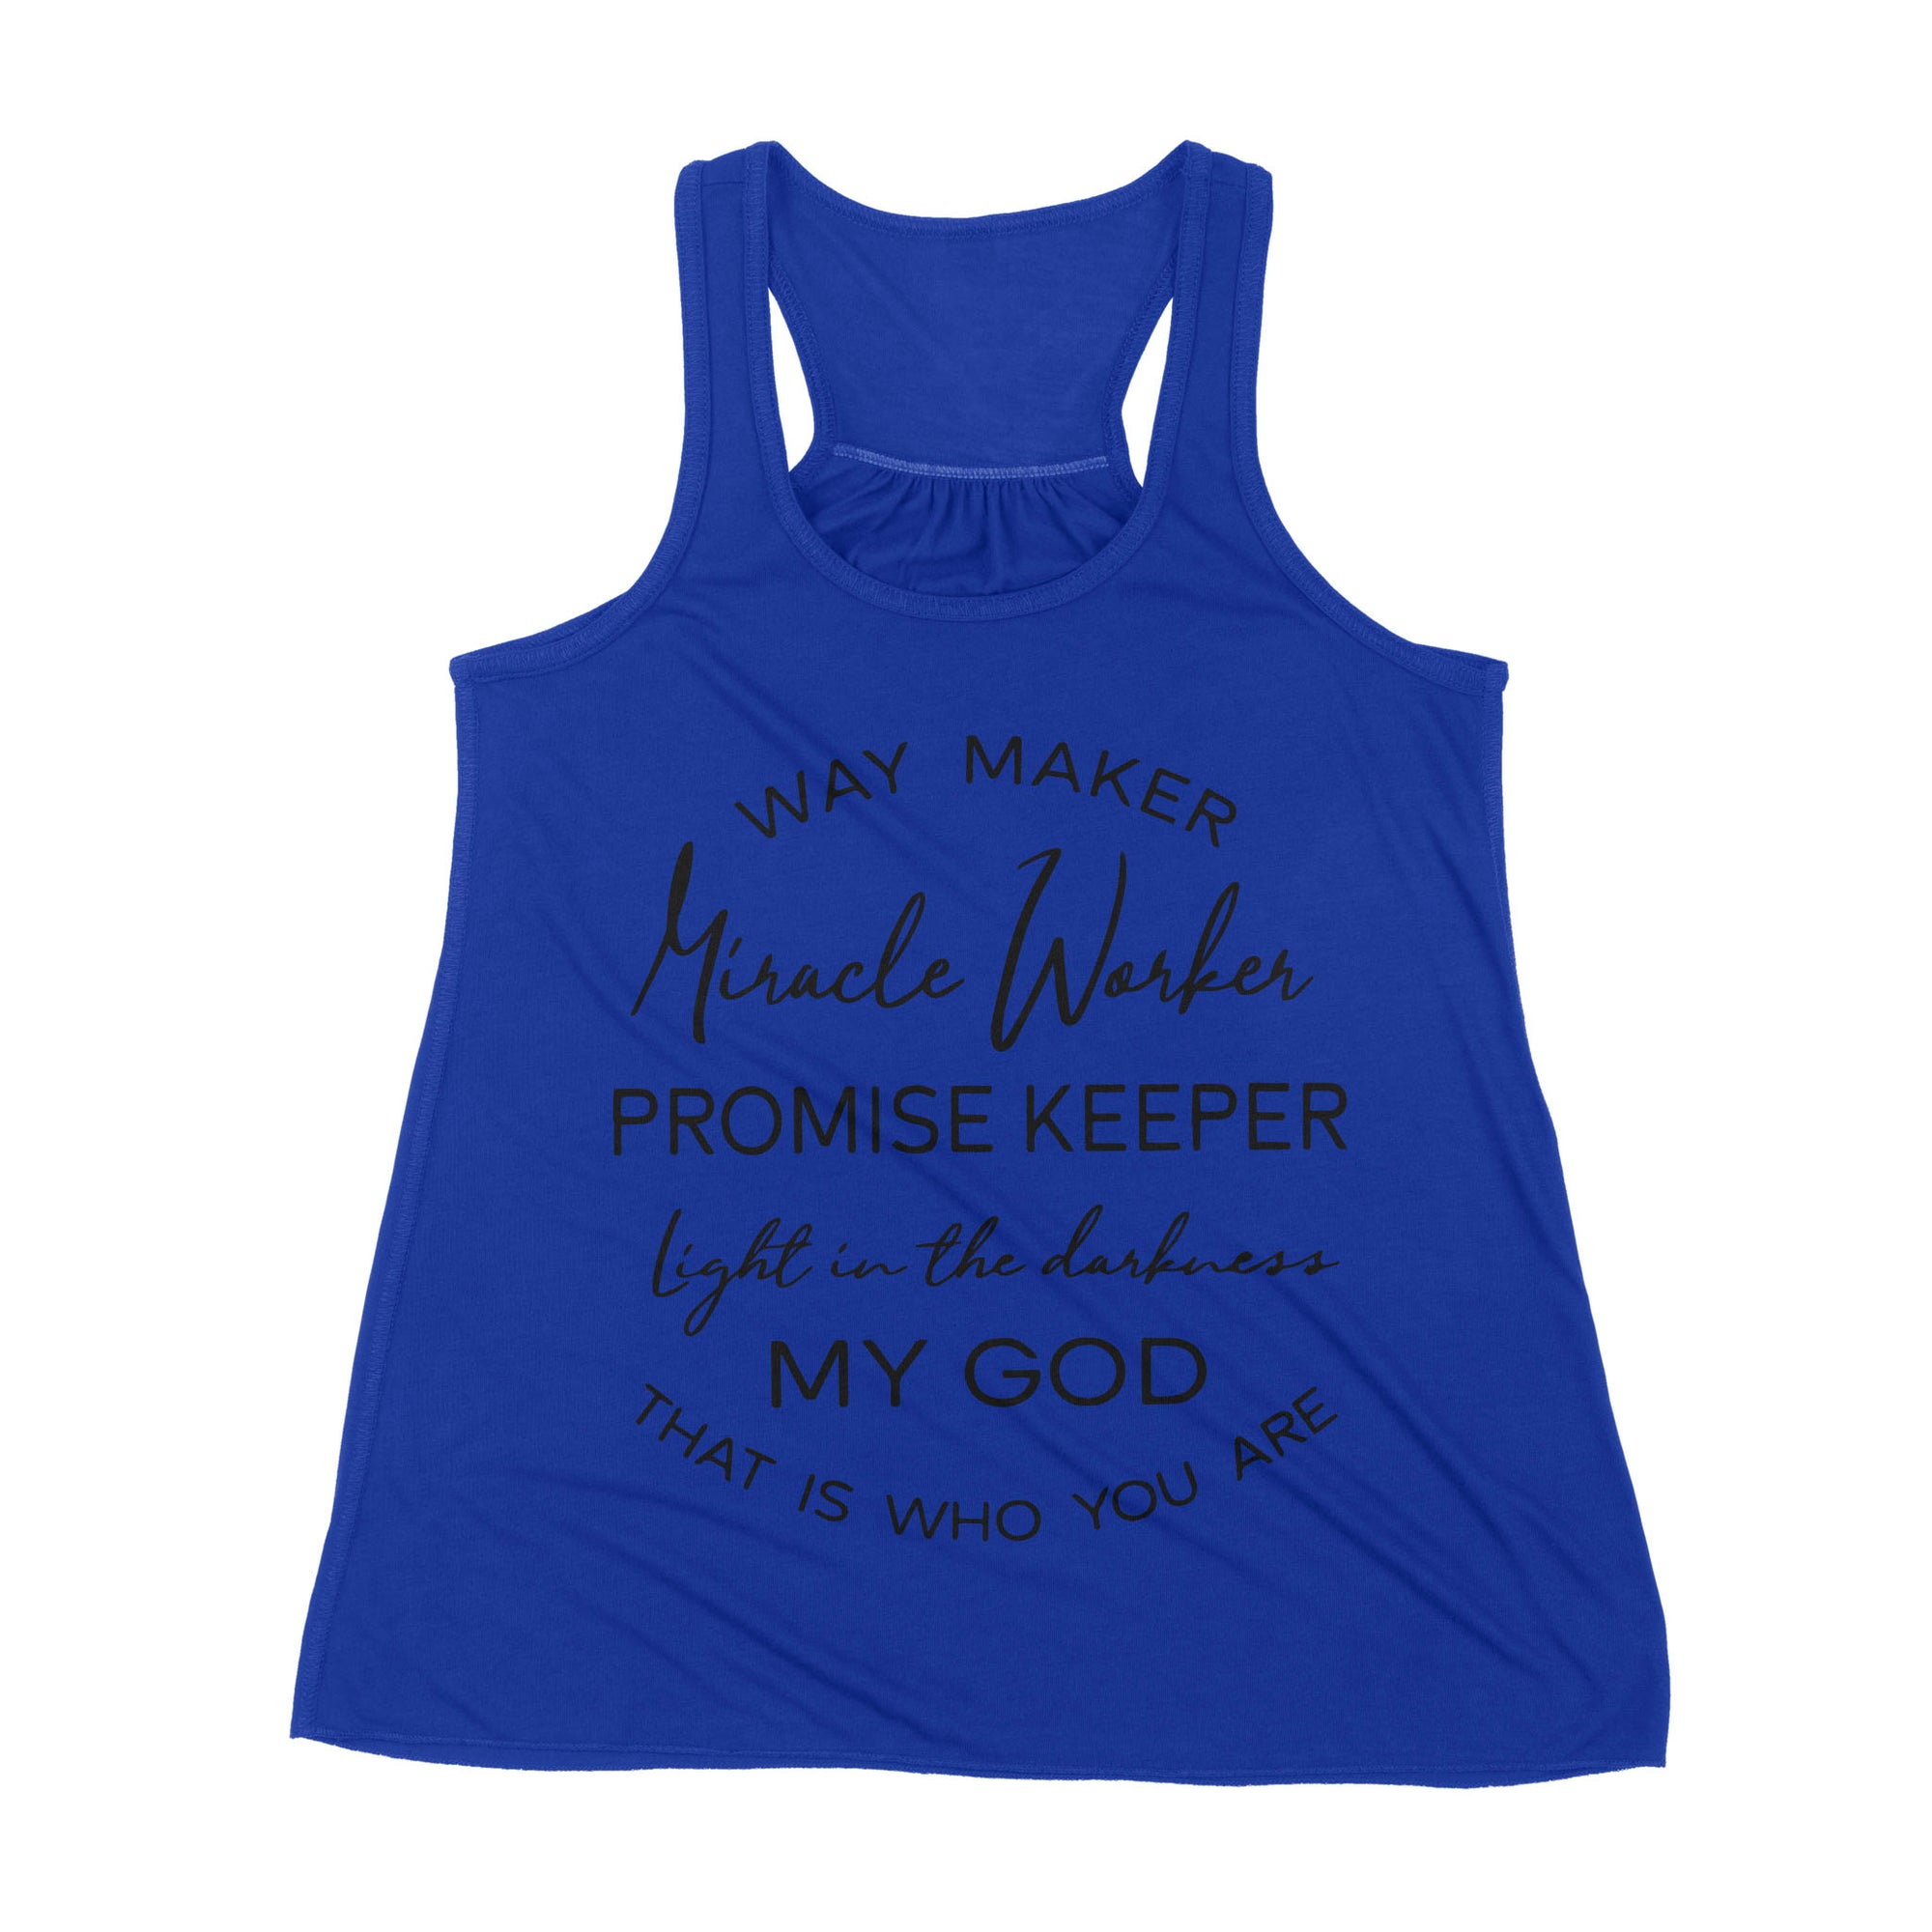 Way Maker Miracle Worker Promise Keeper Light In The Darkness My God That Is Who You Are - Premium Women's Tank